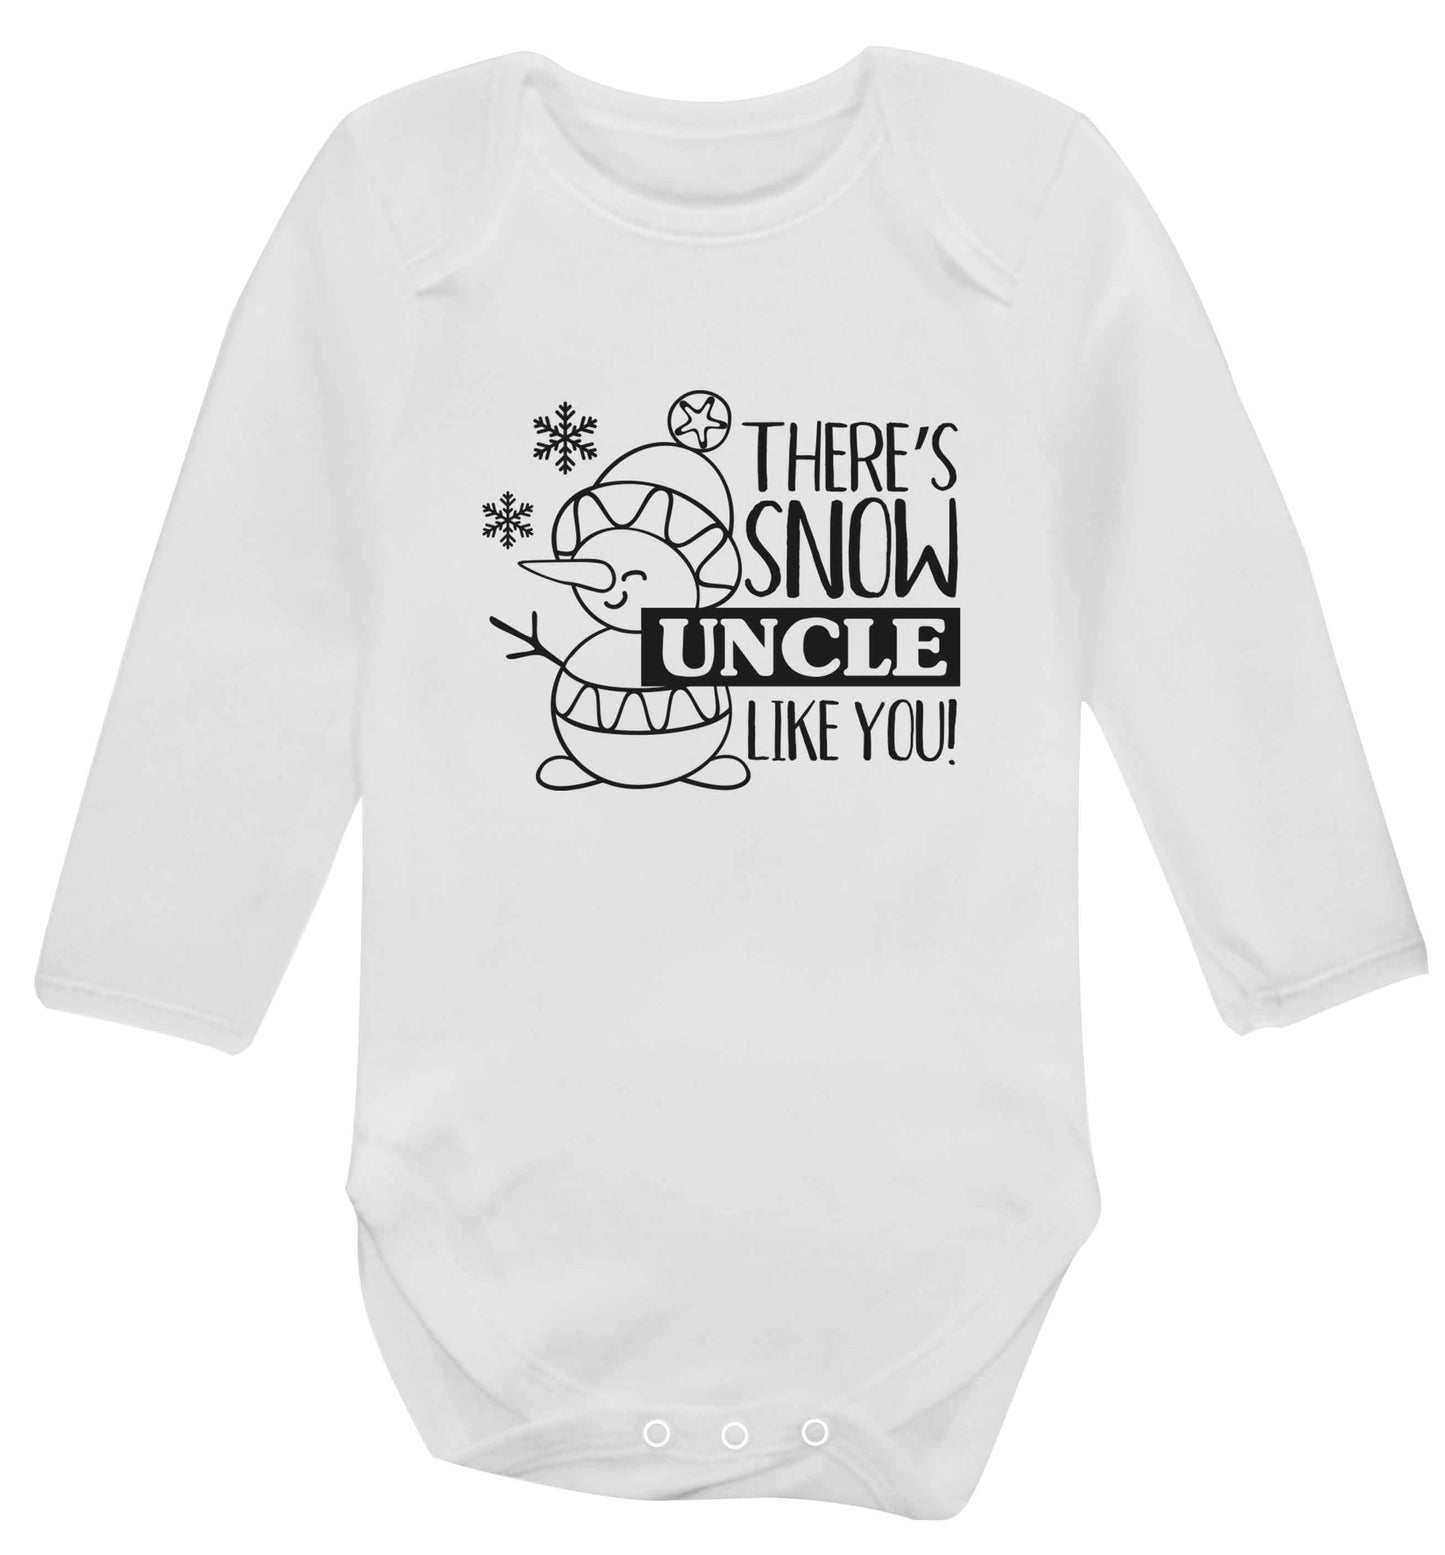 There's snow uncle like you baby vest long sleeved white 6-12 months